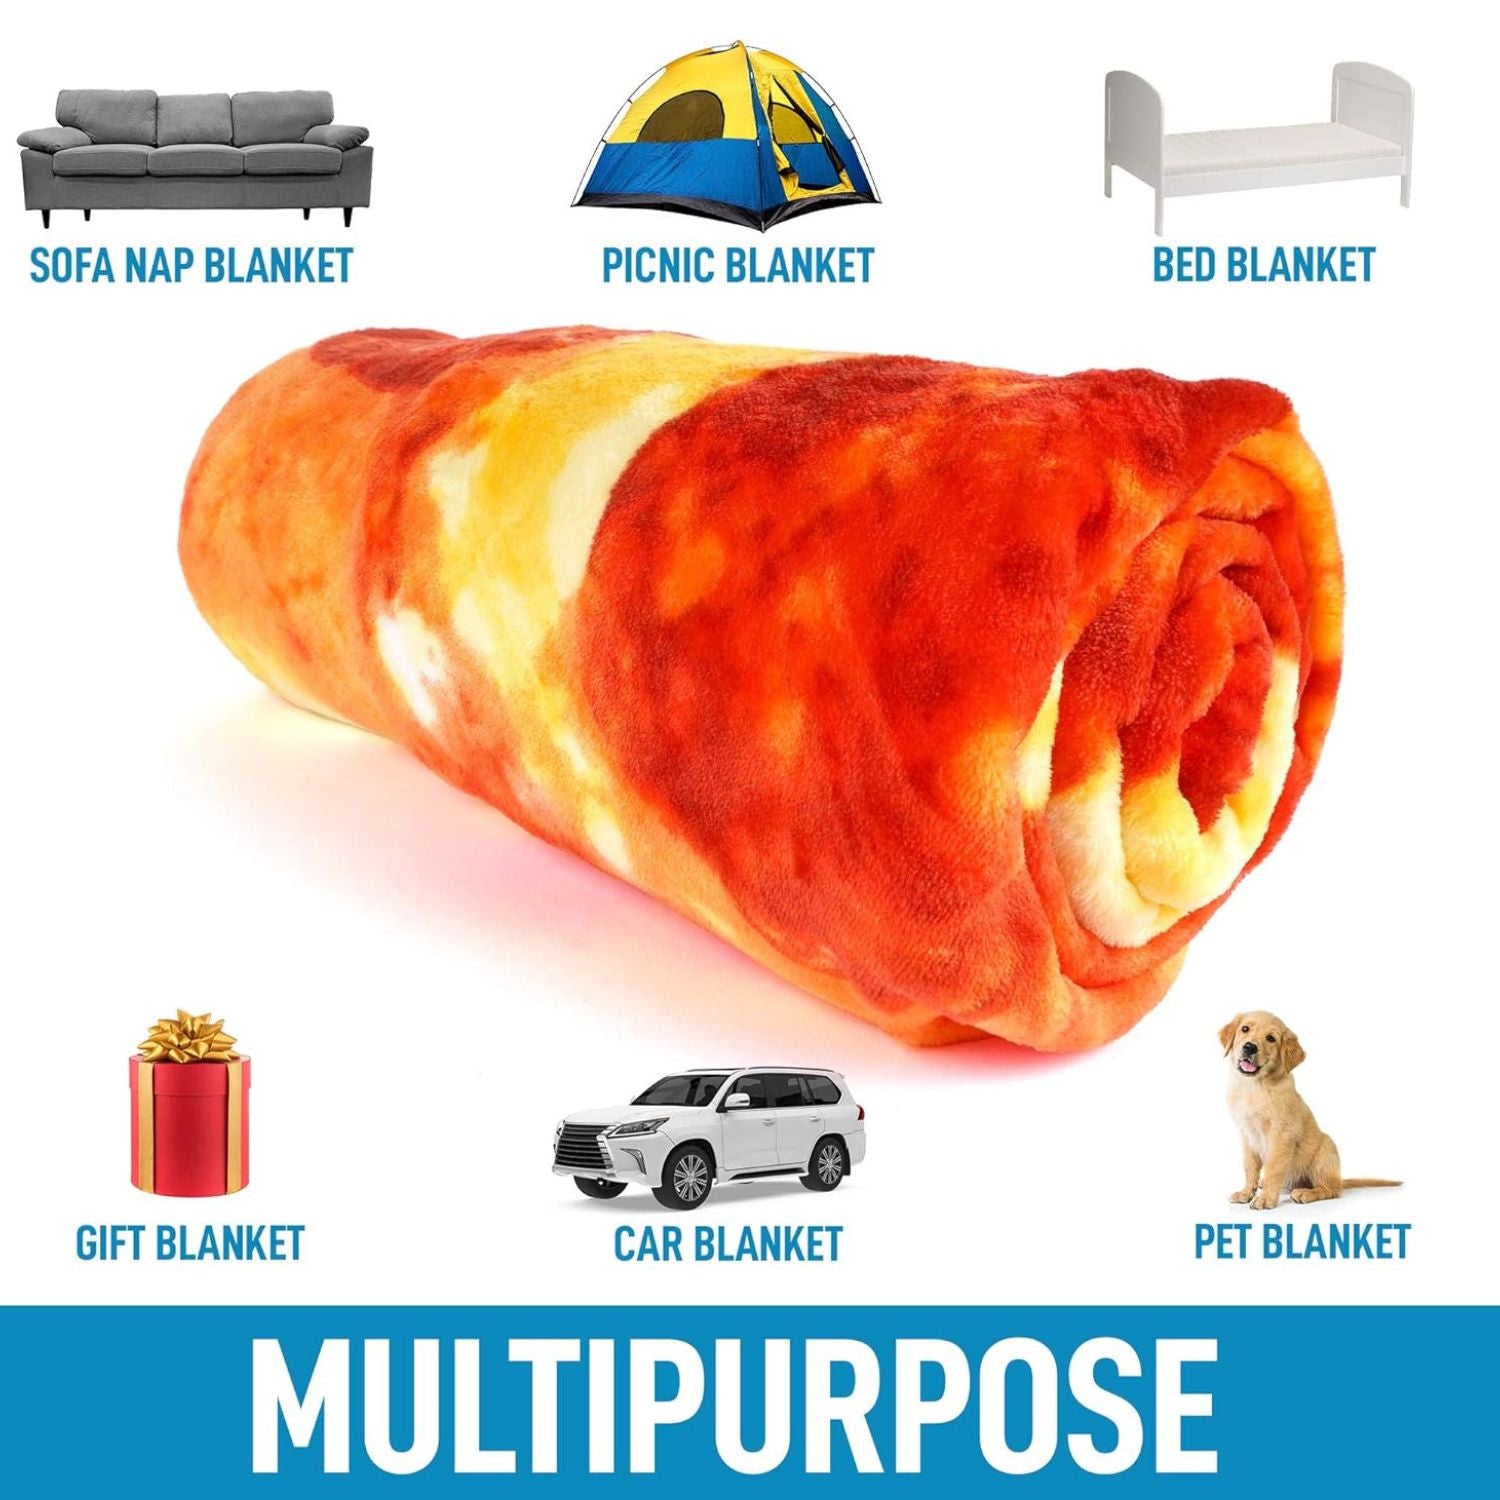 Realistic Pizza Blanket Burrito Soft And Cuddly Gift For Kids And